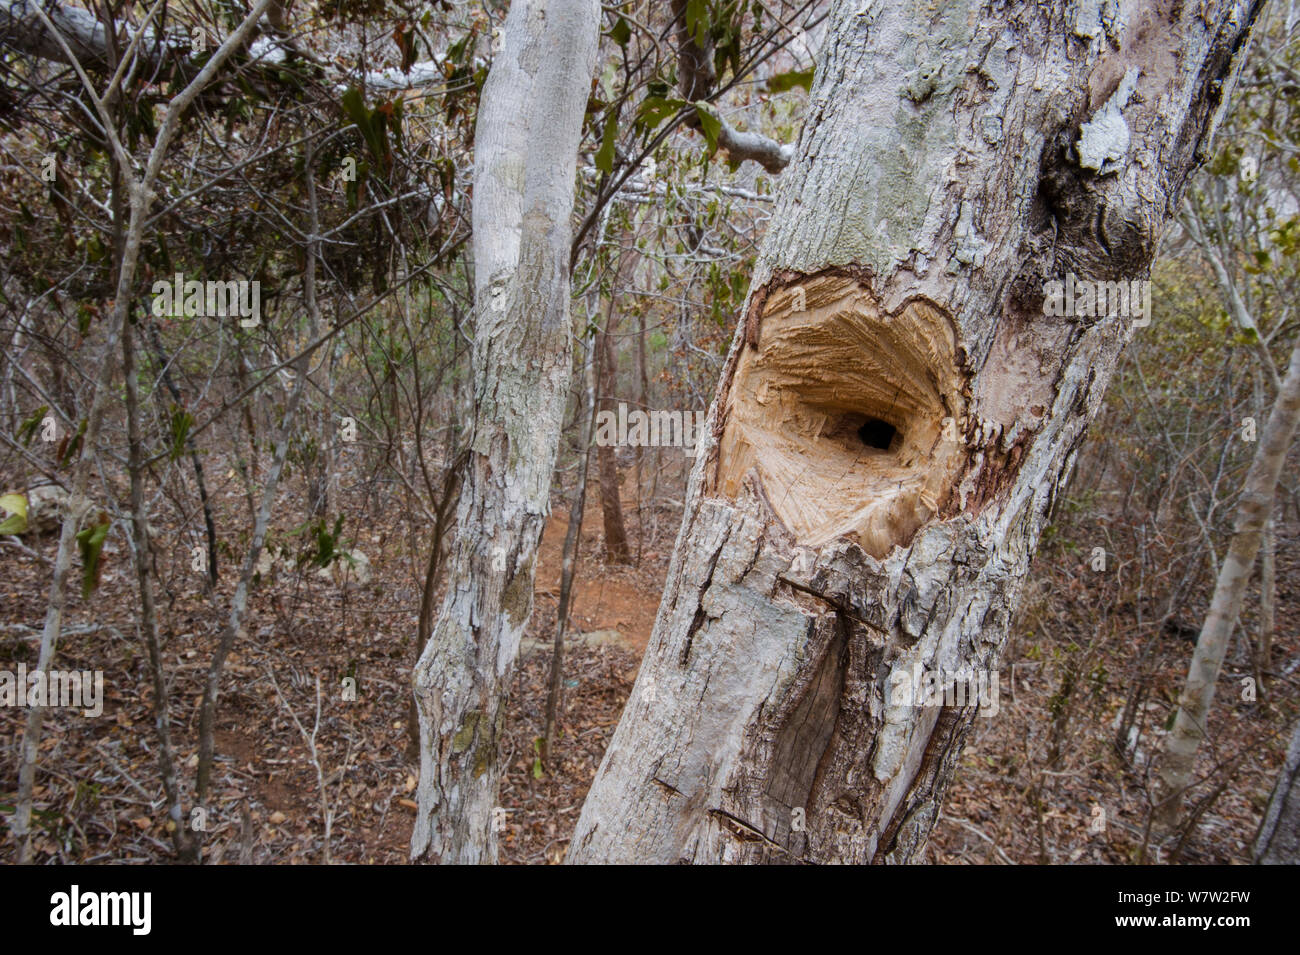 Hole chewed in tree trunk by a feeding Aye-aye (Daubentonia madagascariensis) excavating for beetle grubs. In the forests near Andranotsimaty, Daraina, northern Madagascar. Endangered species. Stock Photo